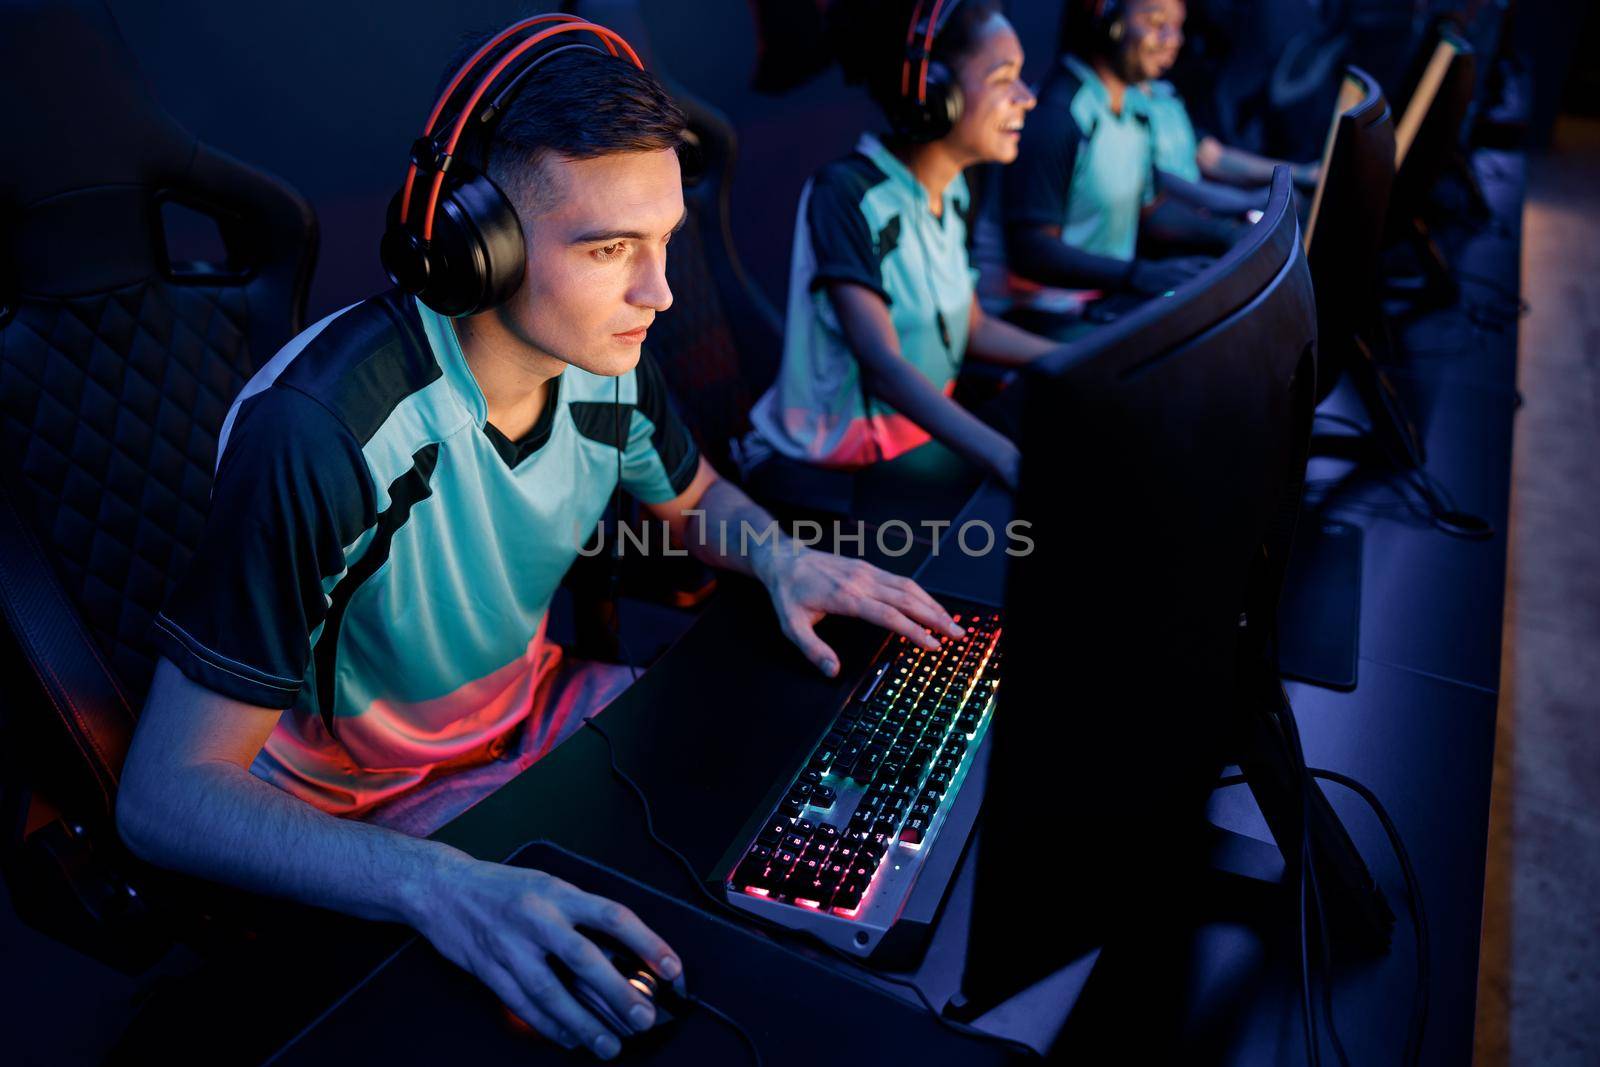 Young esports player concentrated on game wearing wired headset while playing online multiplayer game in cyber club